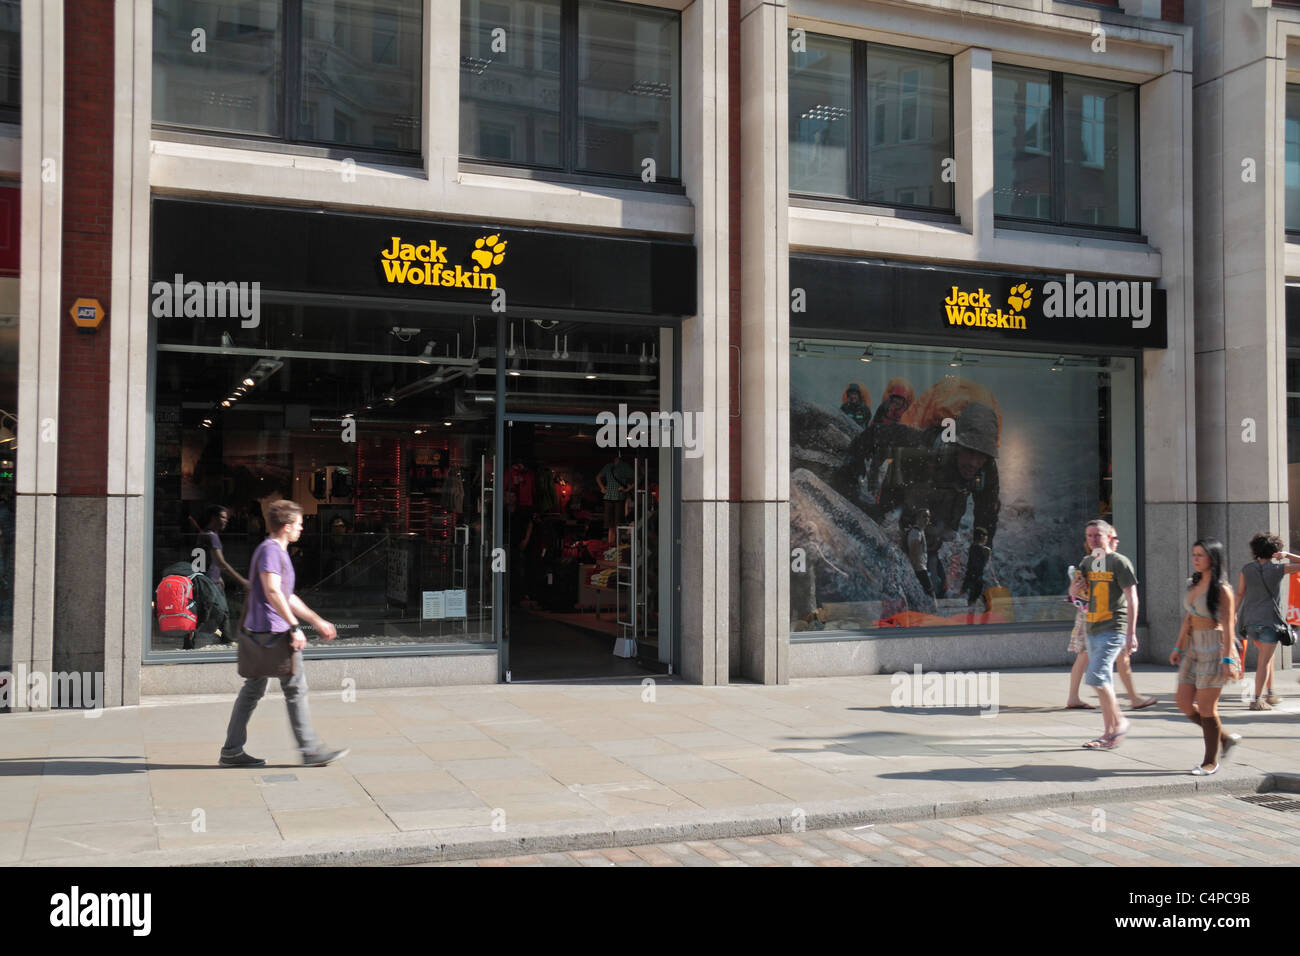 The Jack Wolfskin outdoor clothing store/shop on Long Acre, Covent Garden,  London, UK Stock Photo - Alamy